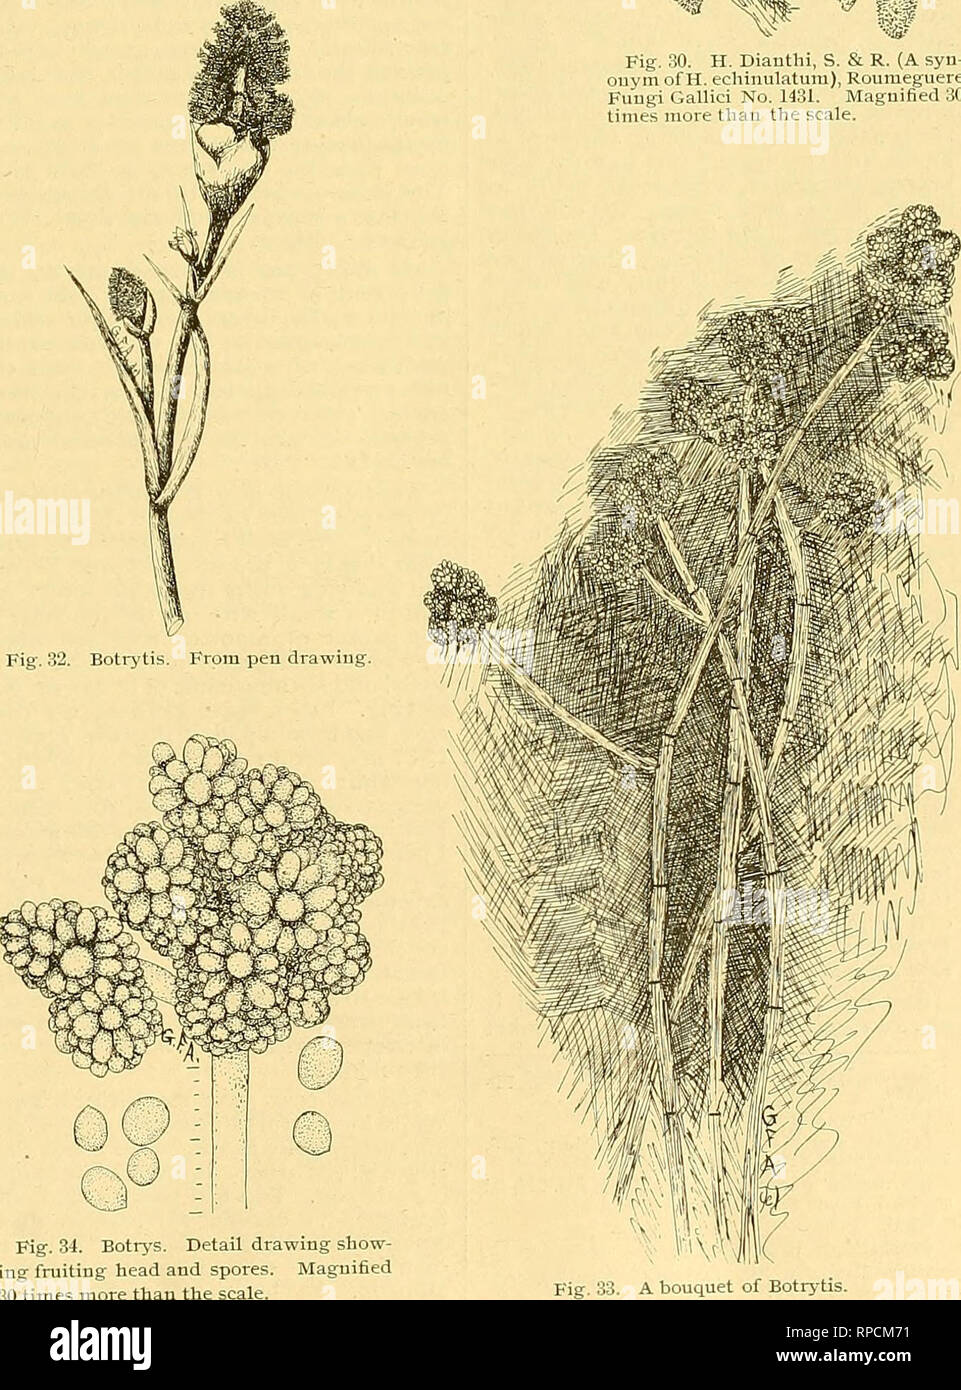 . The American florist : a weekly journal for the trade. Floriculture; Florists. Fig. 30. H. Dianthi, S. &amp; R. (A syn-. onym of H. echinulatum), Roumeguere Fungi Gallici No. 1431. Magnified 30 times more than the scale. Fig. 31. Cladosporiuni herbamm var. nodosum. Tuft of fruiting threads and spores. Magnified 30 times more than the scale. As the vegetive threads growing within the leaf tissue exhaust its sub- stance at certain points there appears a nearly circular light colored spot. In these spots directly beneath the epidermis the threads form small tubercular bodies, dark brown in colo Stock Photo